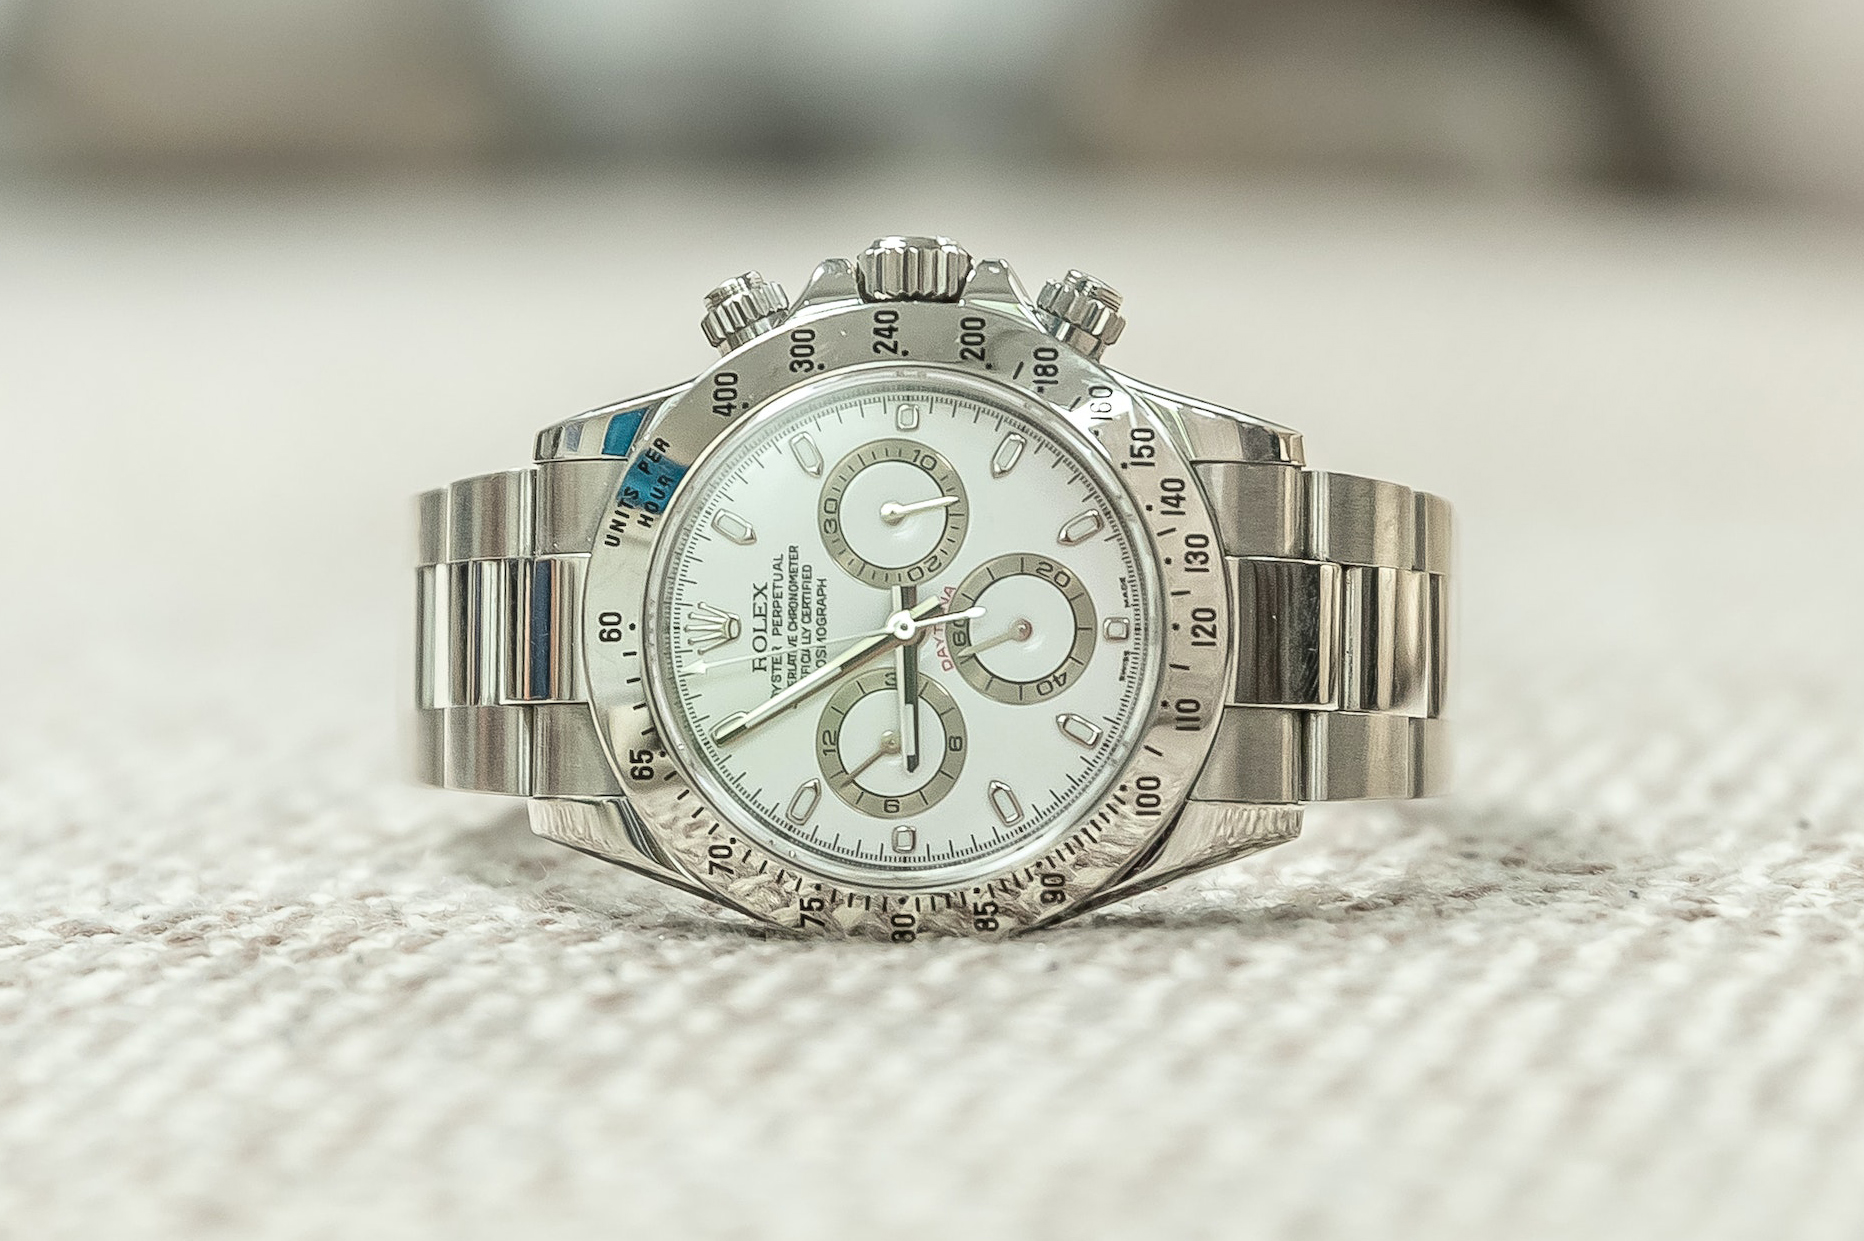 2010 ROLEX DAYTONA for sale by auction in Chichester, Sussex 